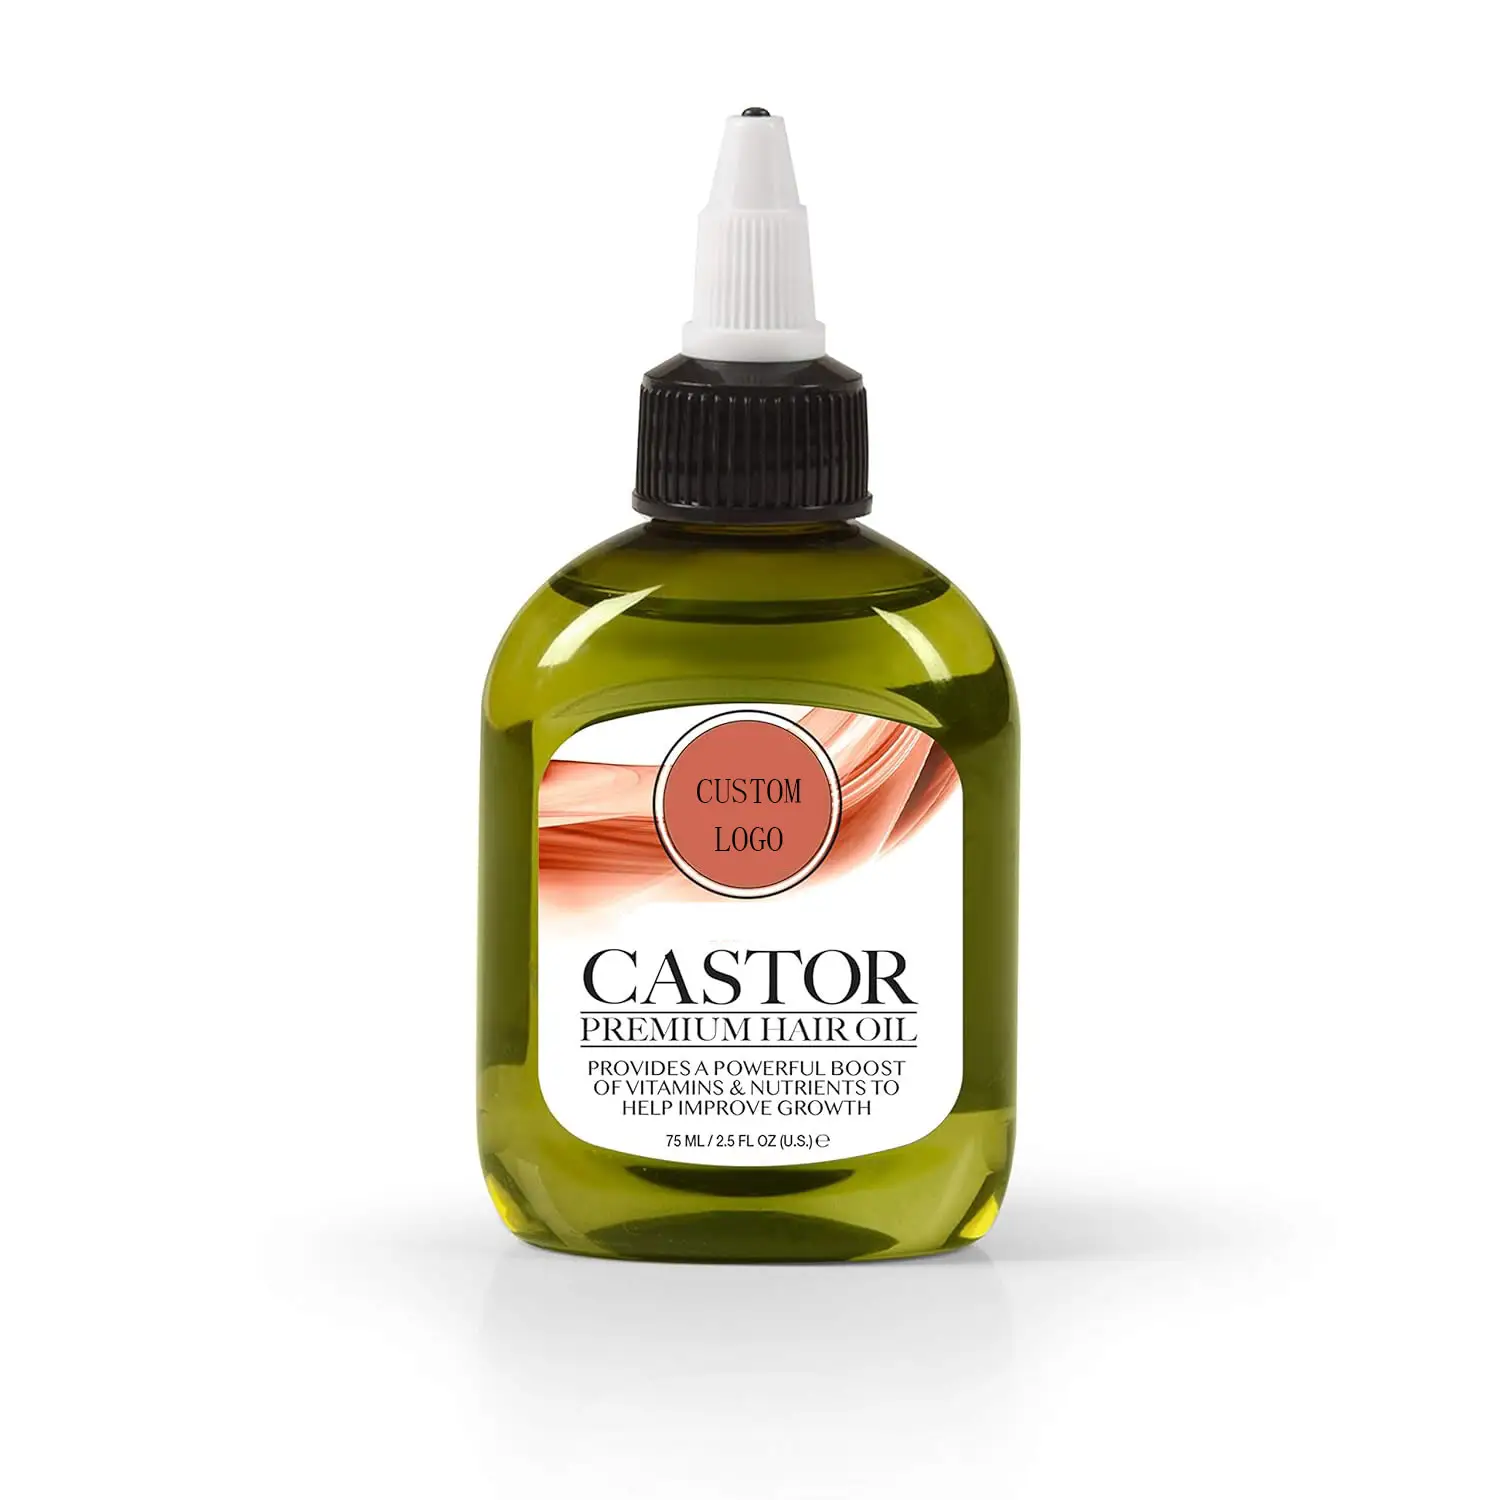 Natural Creature Oil Tea Mint Extracts Itching And Drying The Treatment Of Nourishing Scalp Castor Essential Oil